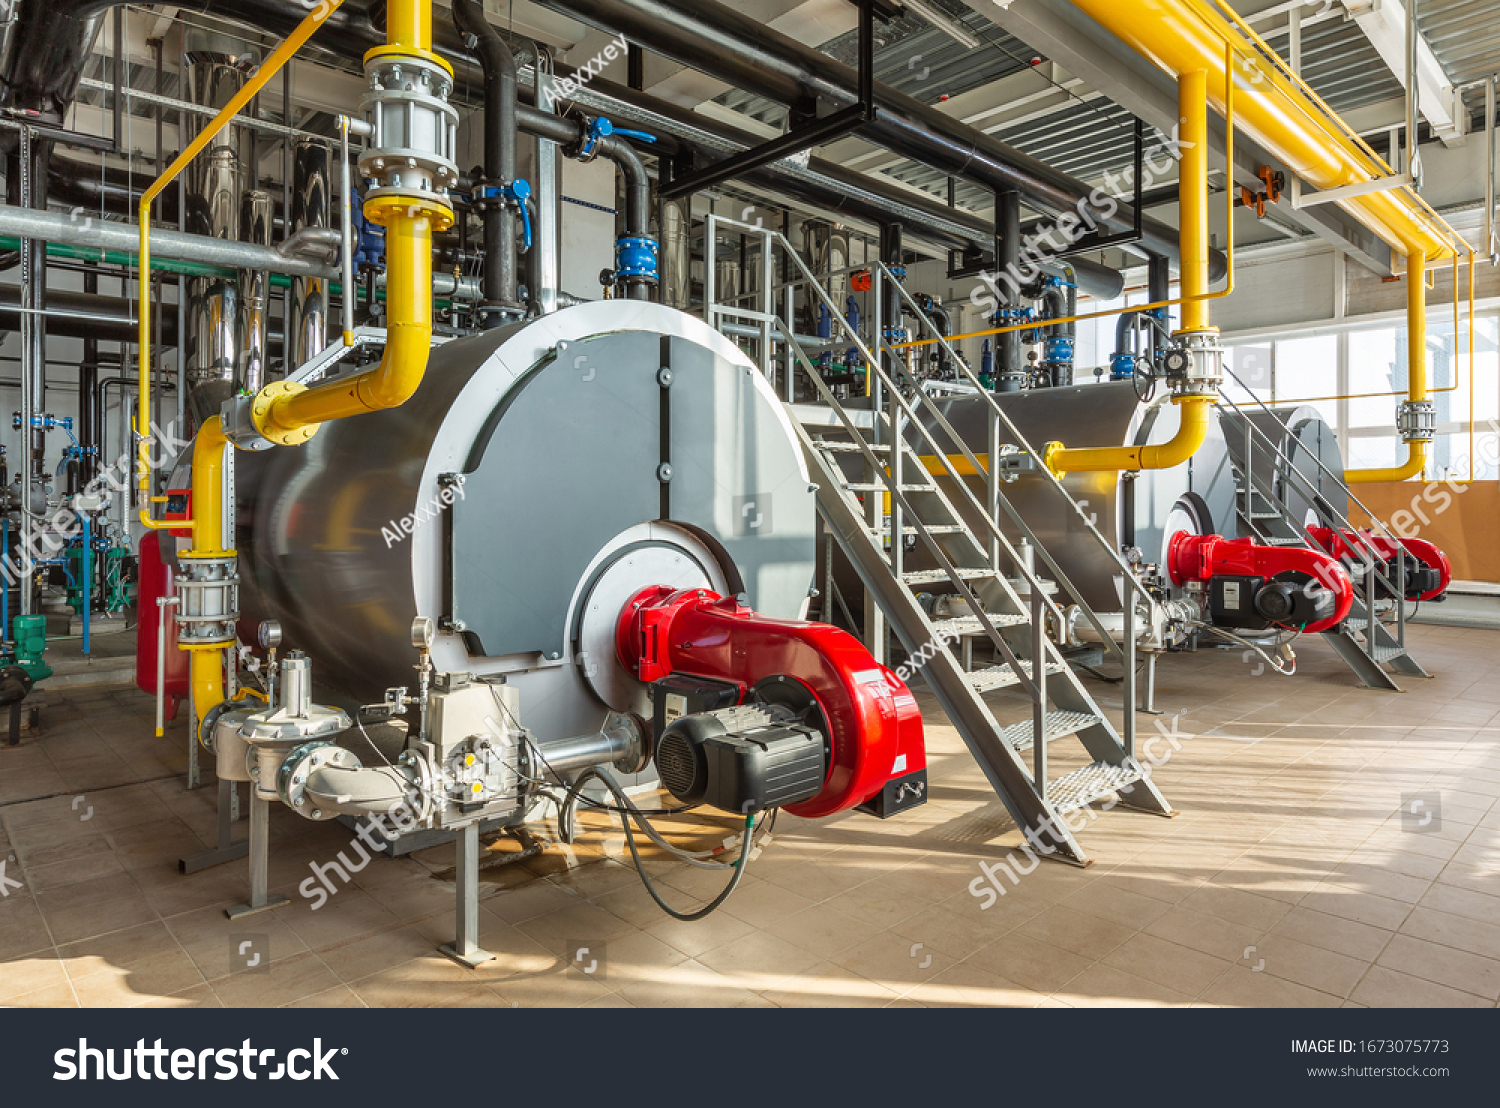 The interior of an industrial boiler room with three large boilers, many pipes, valves and sensors. #1673075773